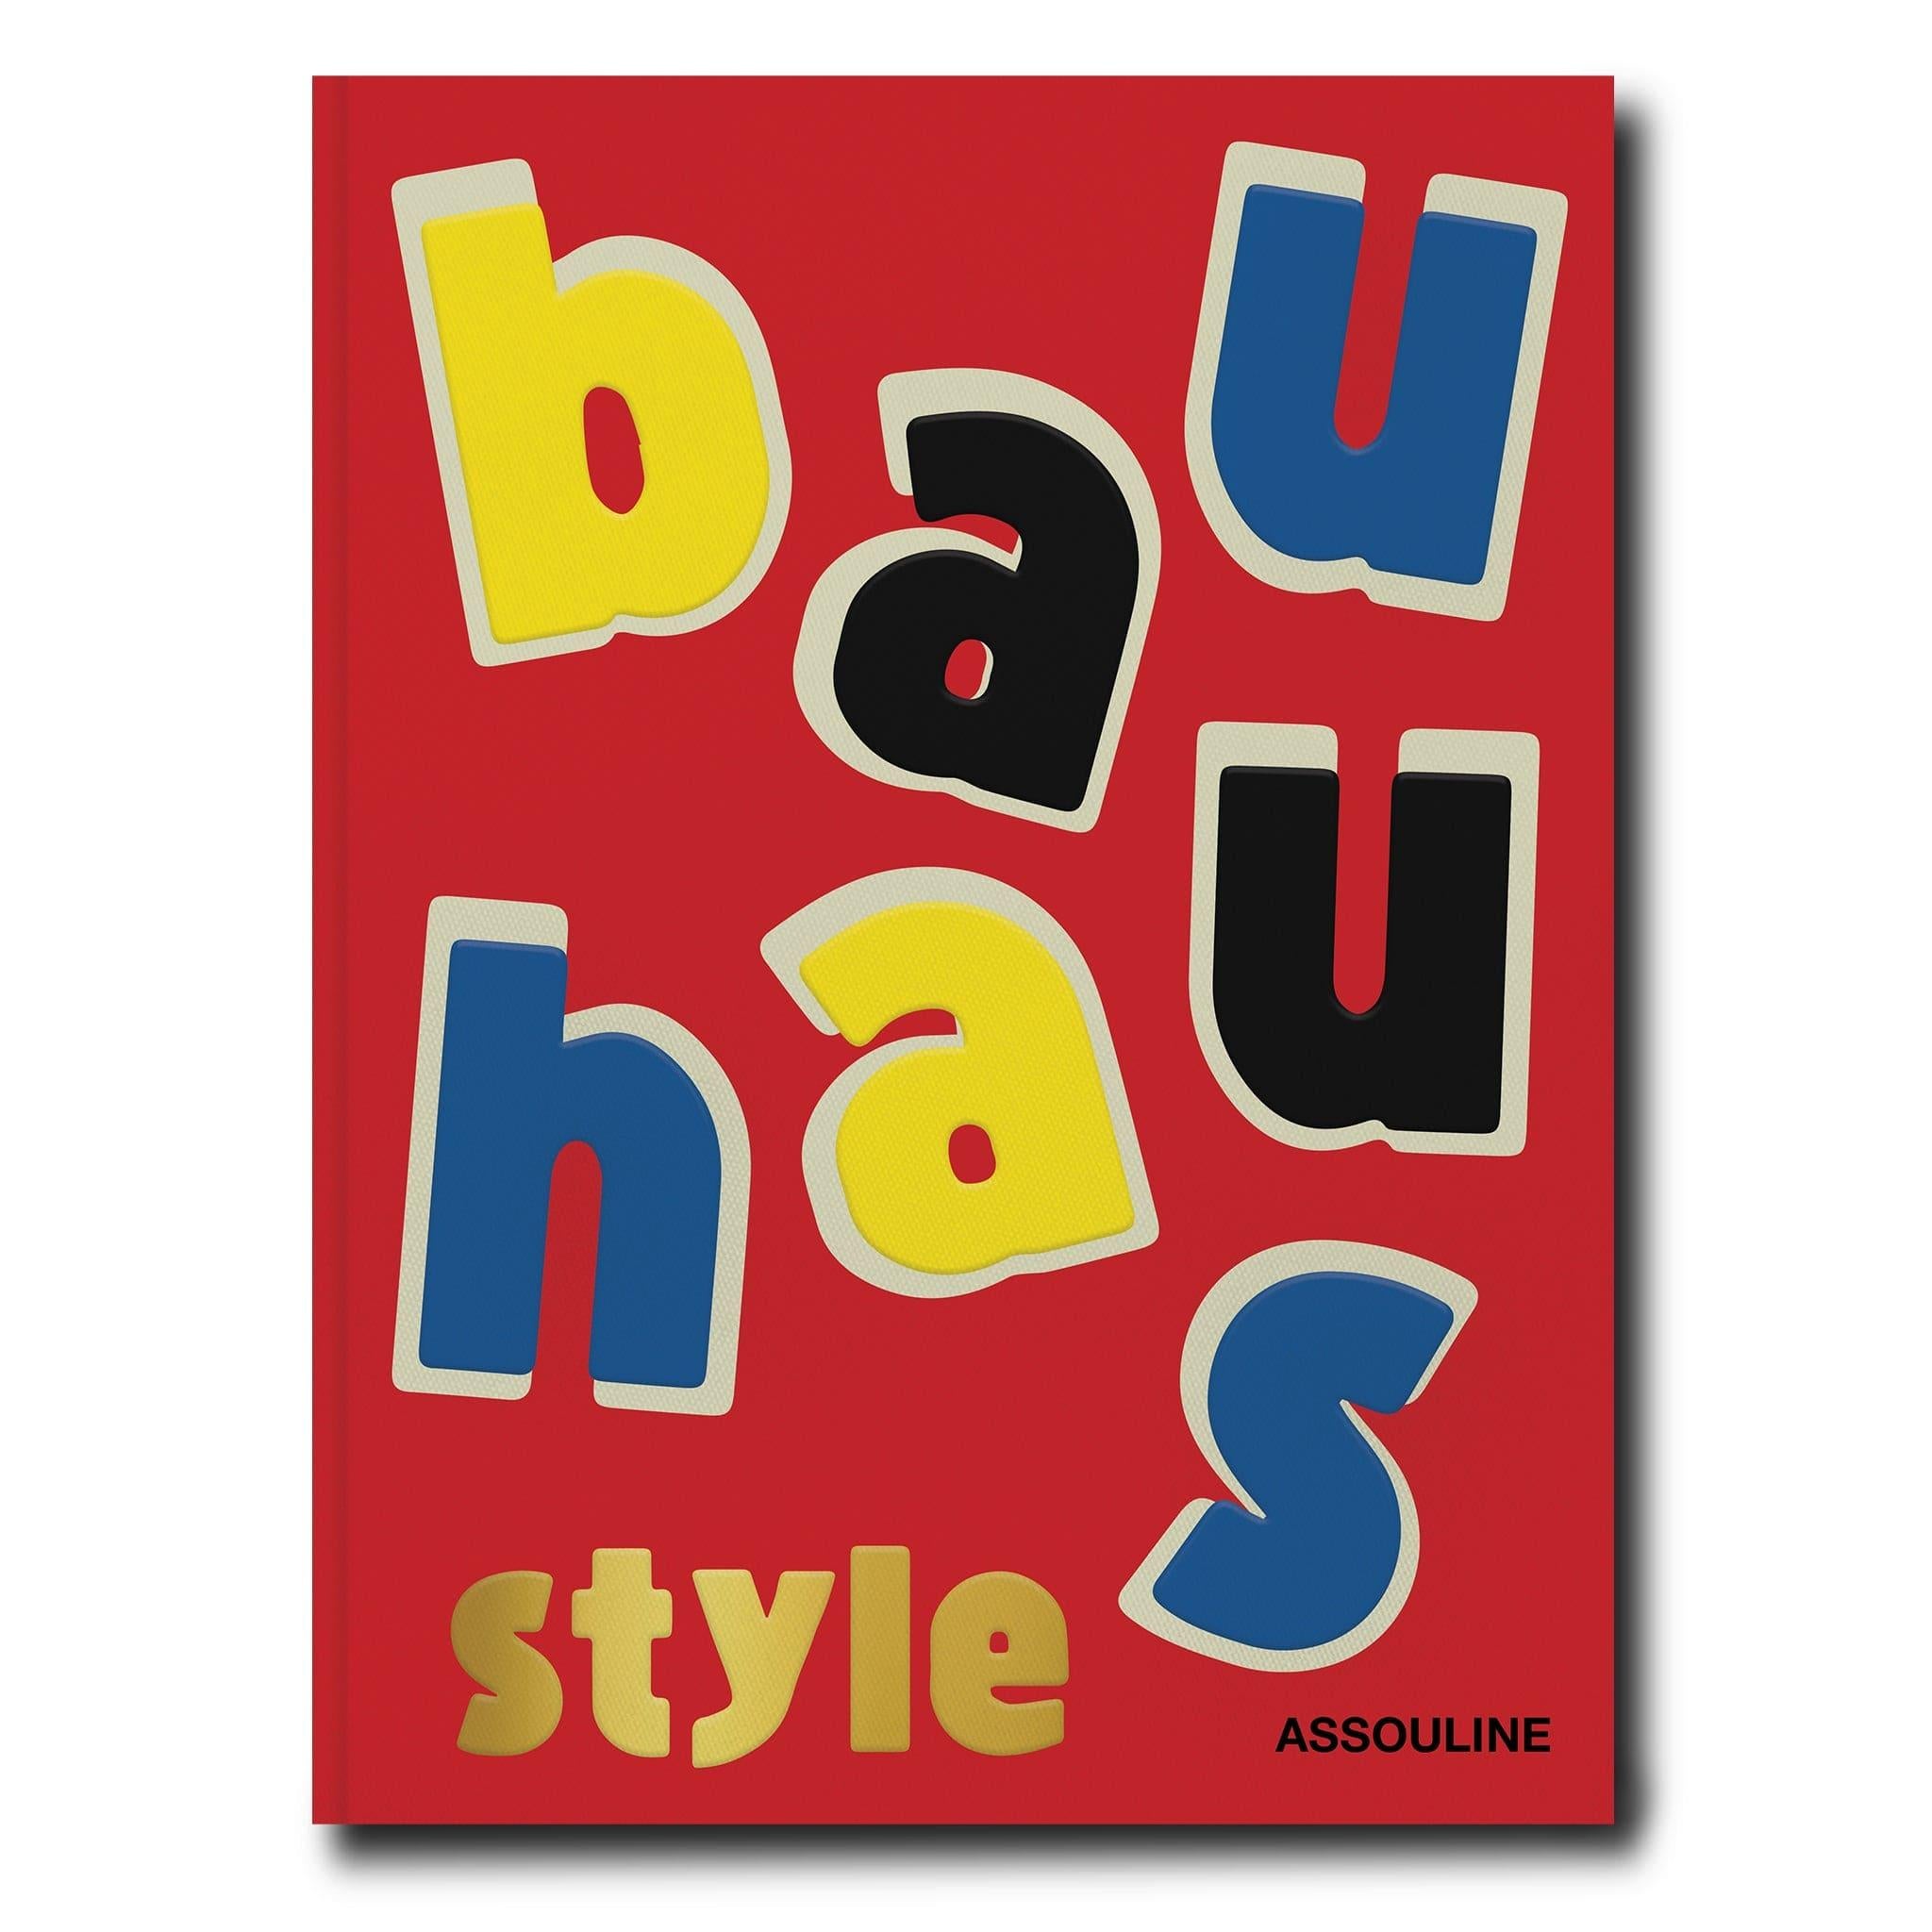 Discover the fascinating world of the Bauhaus, the most influential art school of the twentieth century, and its lasting impact on modern culture. From architecture and art to design, fashion, film, and photography, the Bauhaus revolutionized